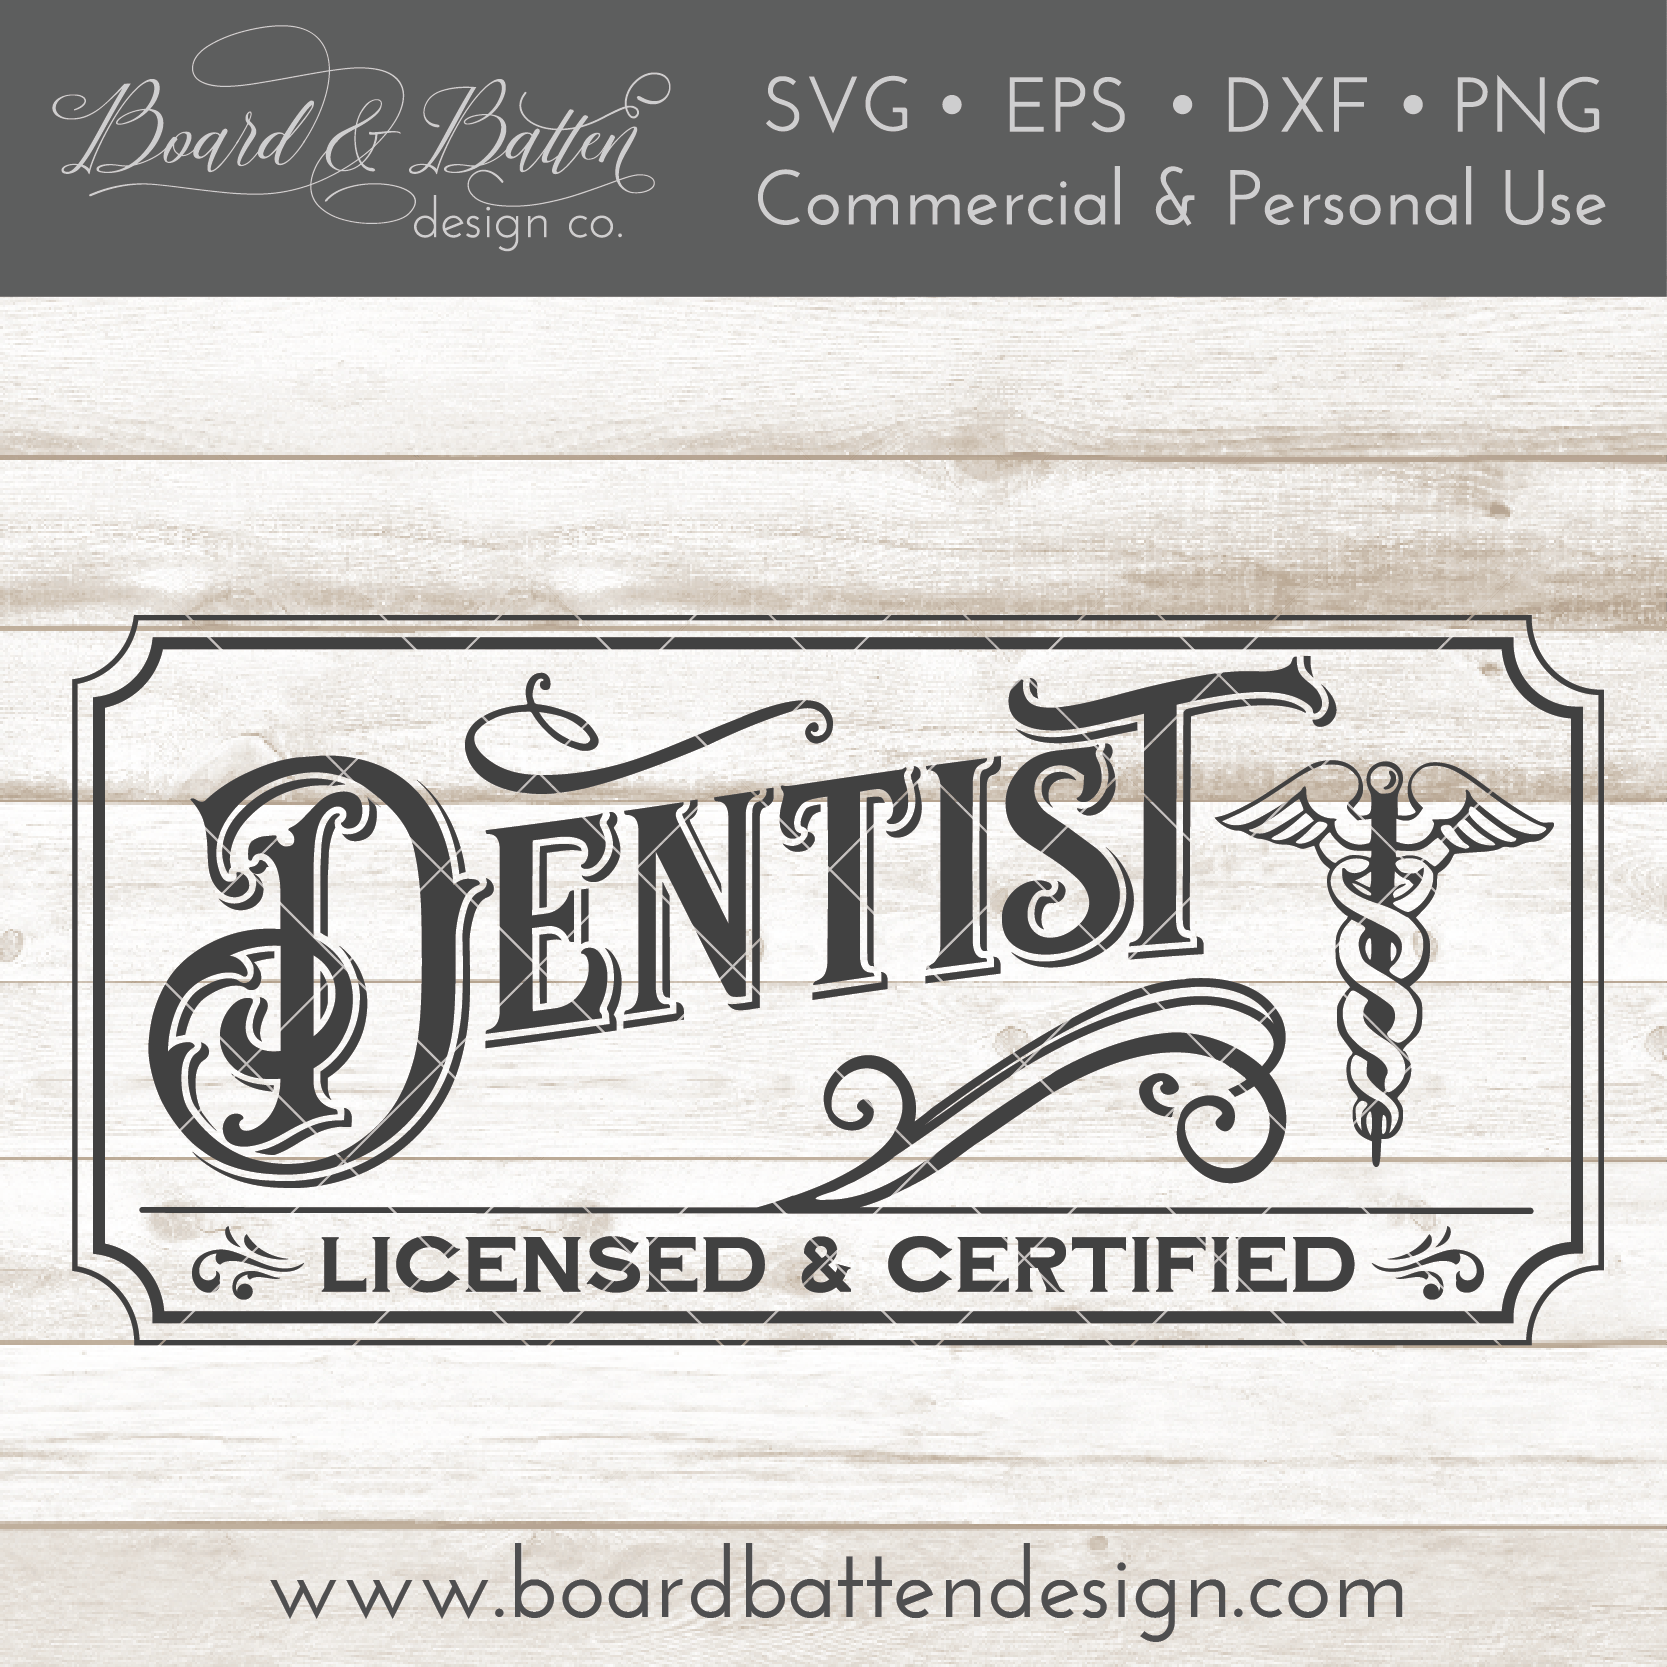 Dentist Tool SVG, PNG, DXF for Cutting, Printing, Designing or more